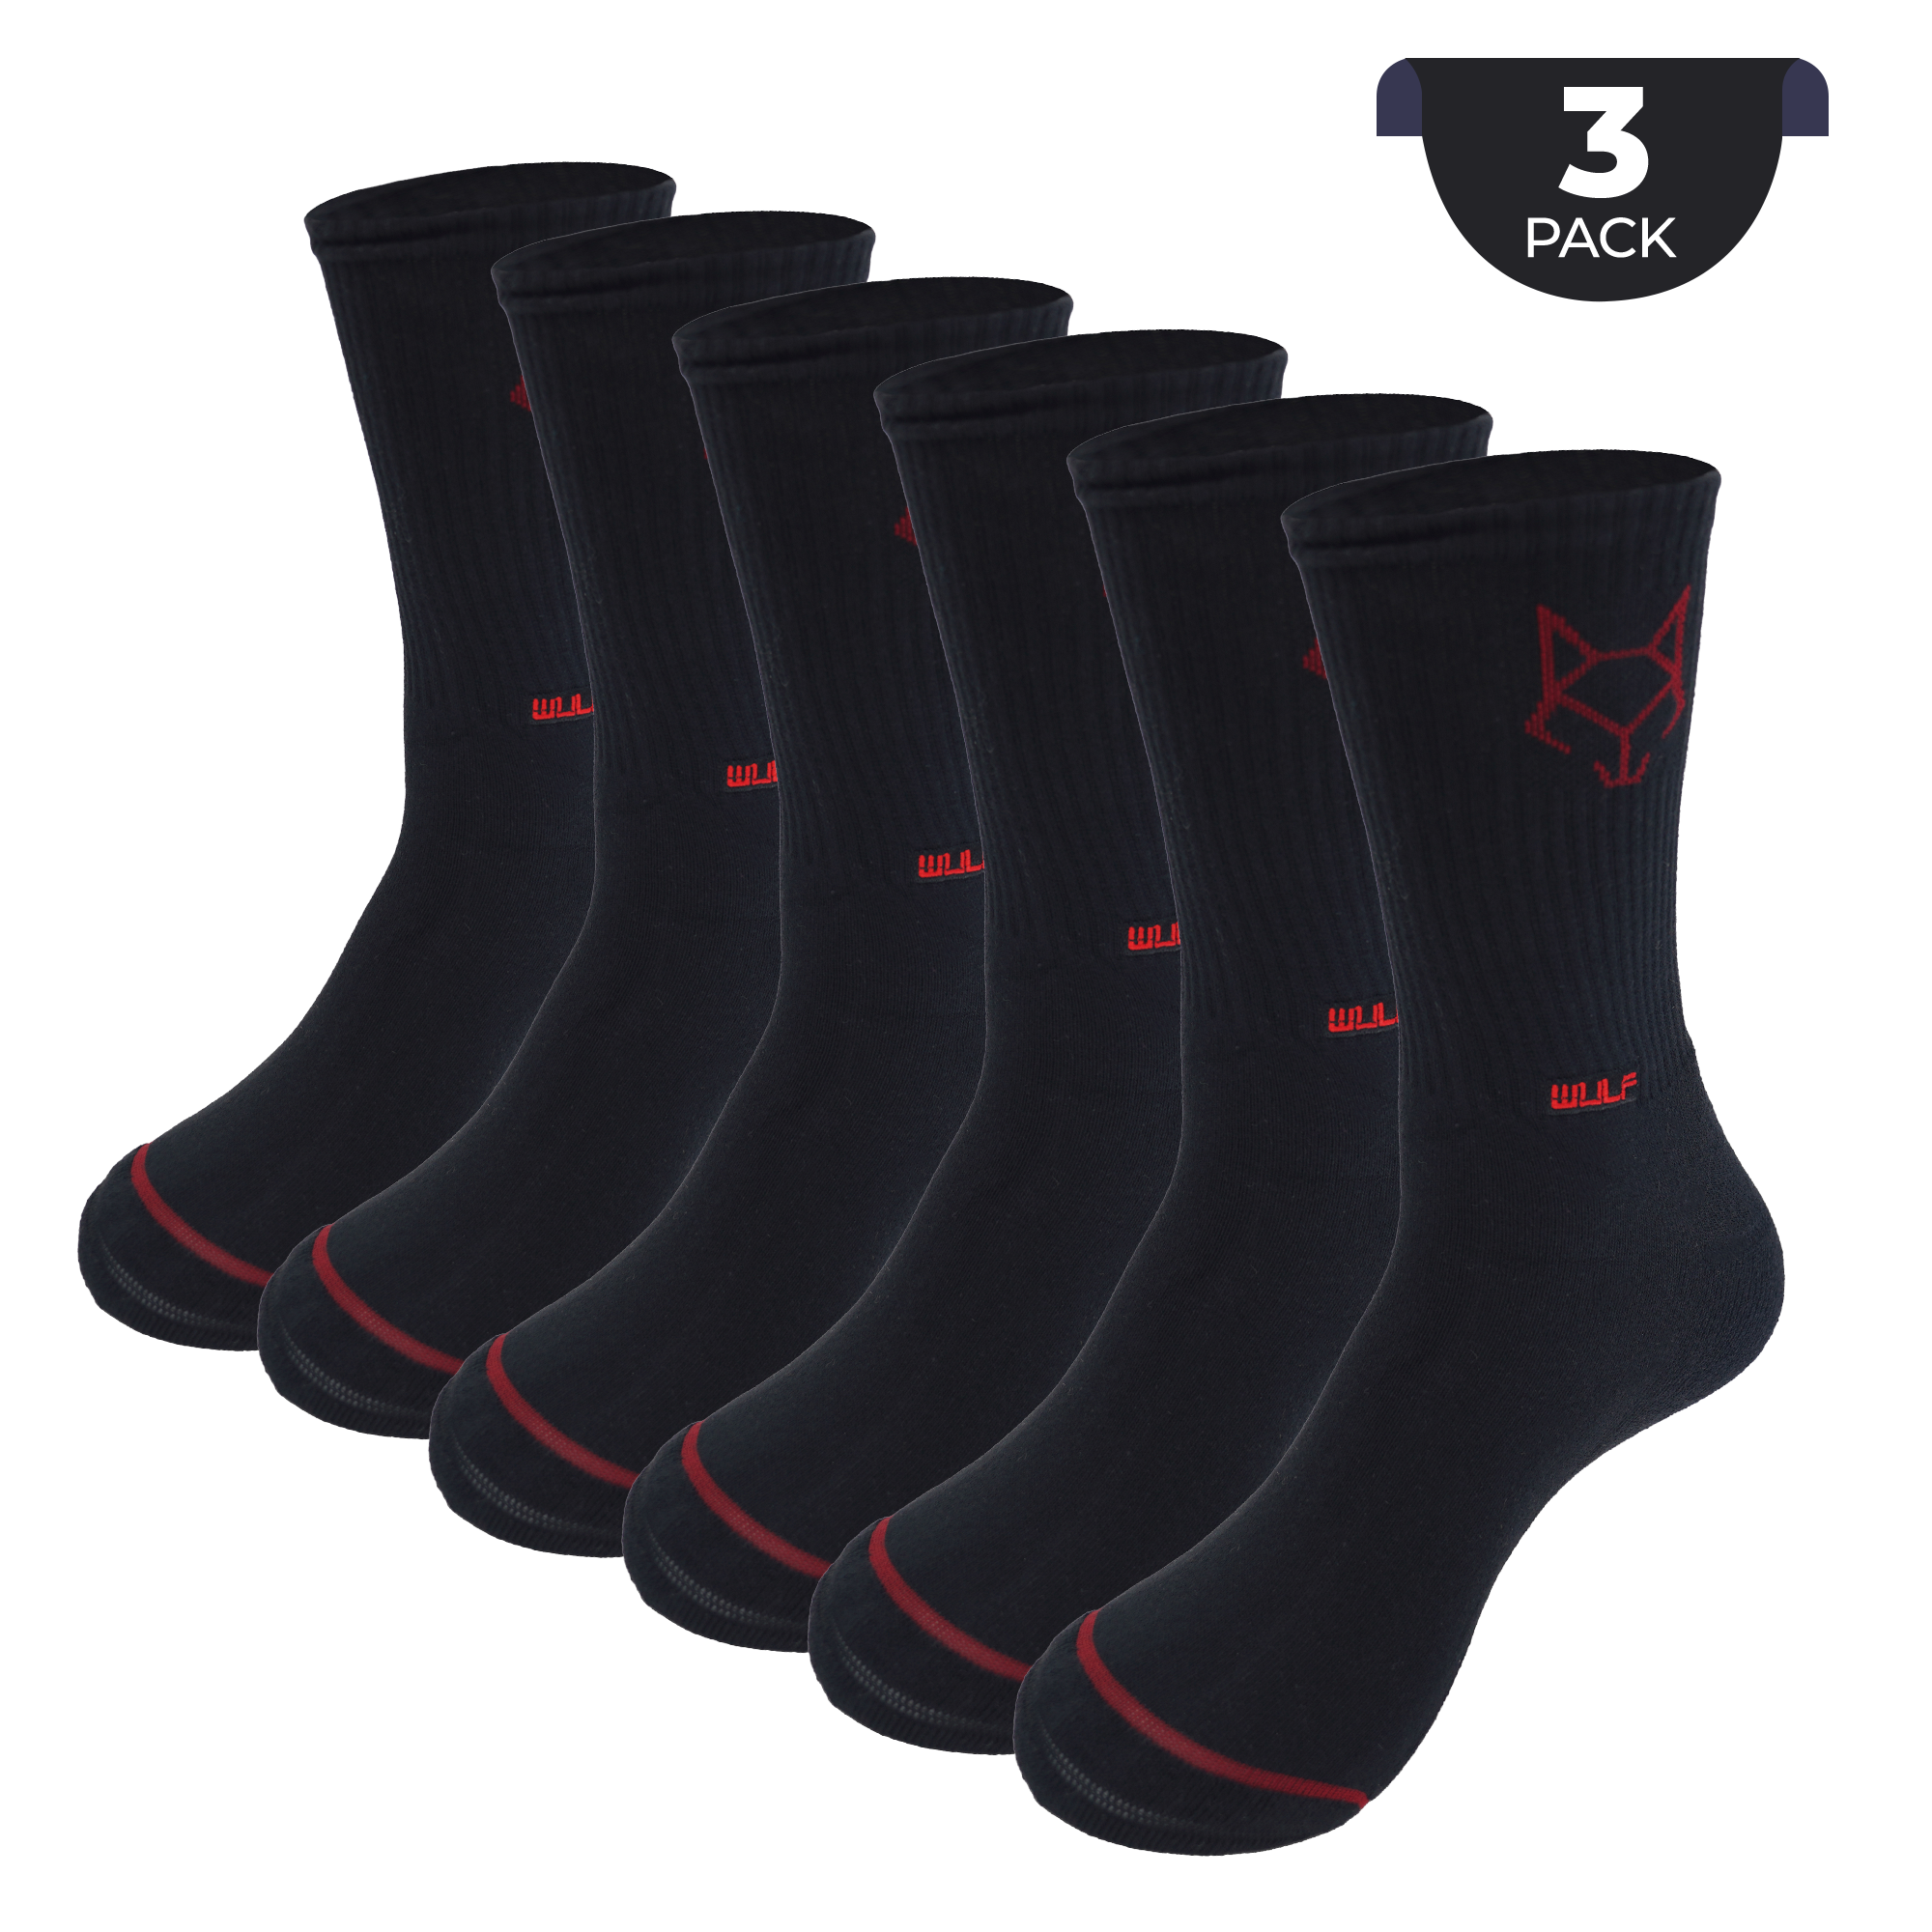 The pack includes three pairs of socks, all in sleek black to pair well with your athletic attire. The socks are adorned with a vibrant red logo on each outer ankle and WULF icons on either side, adding a touch of style to your athletic fashion.